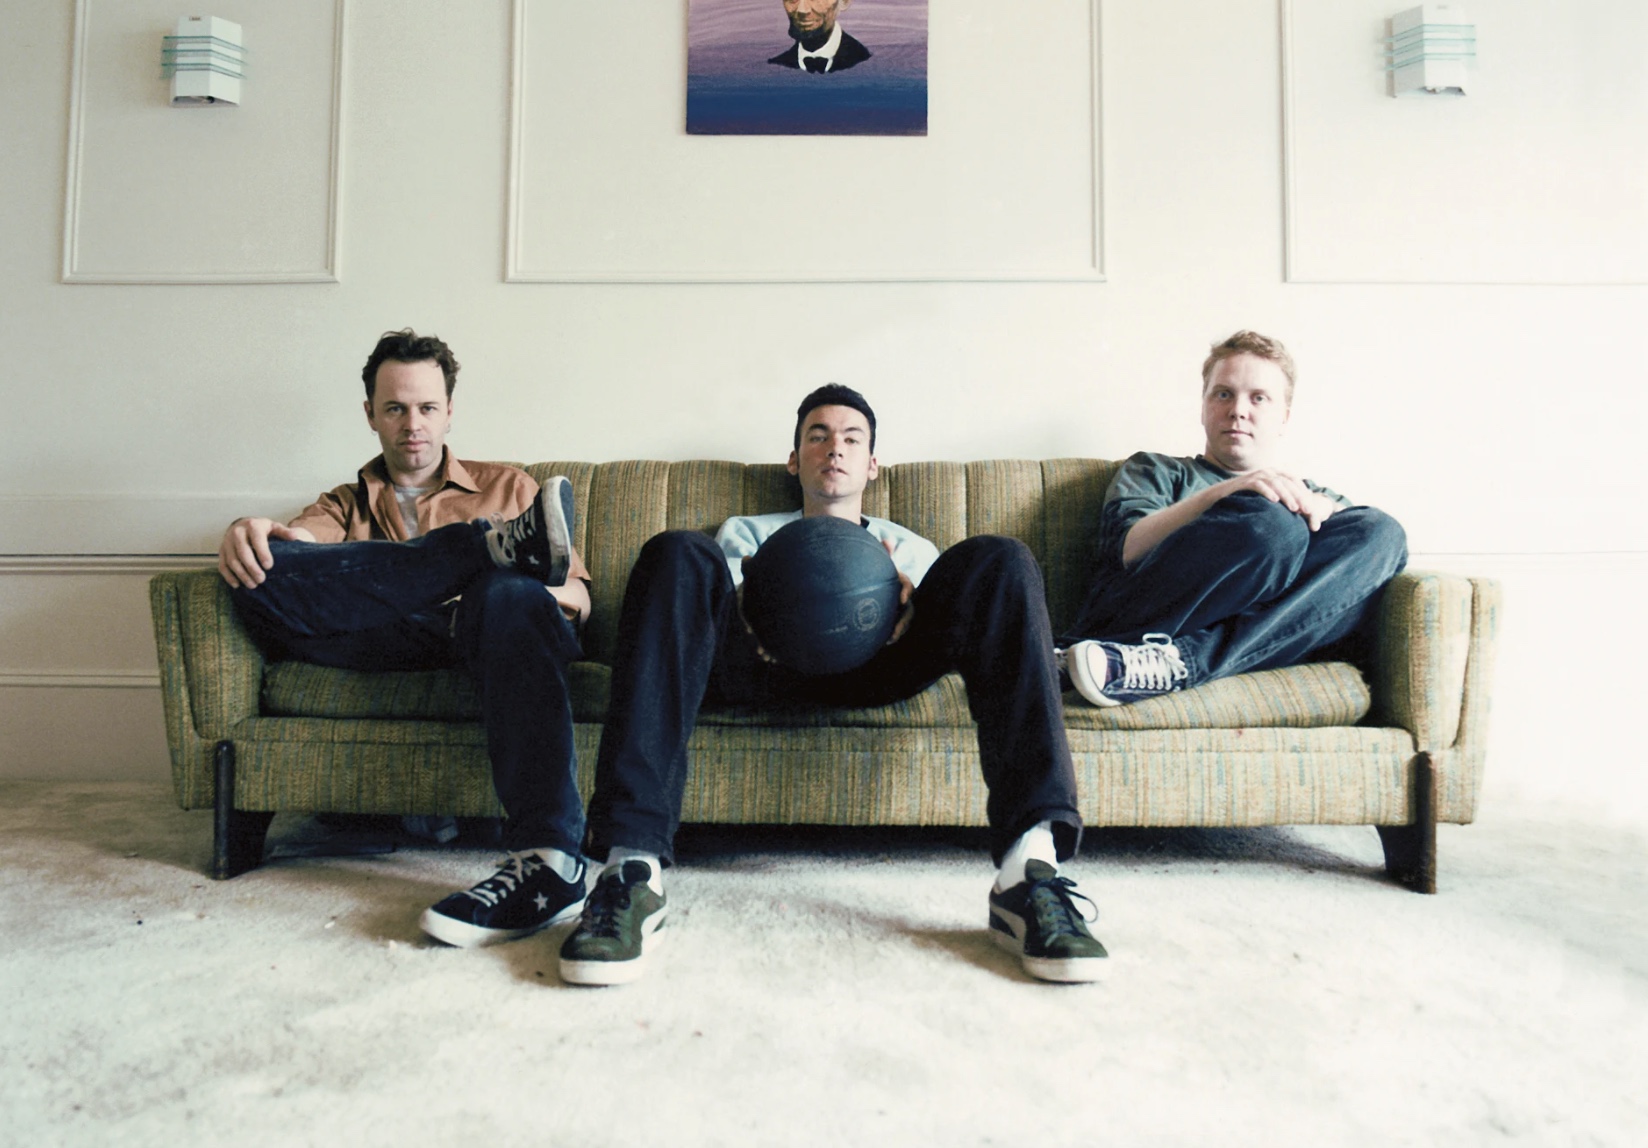 Jawbreaker Announce 25th Anniversary of “Dear You” Mini Tour – Only 7 City Stops That Include Chicago